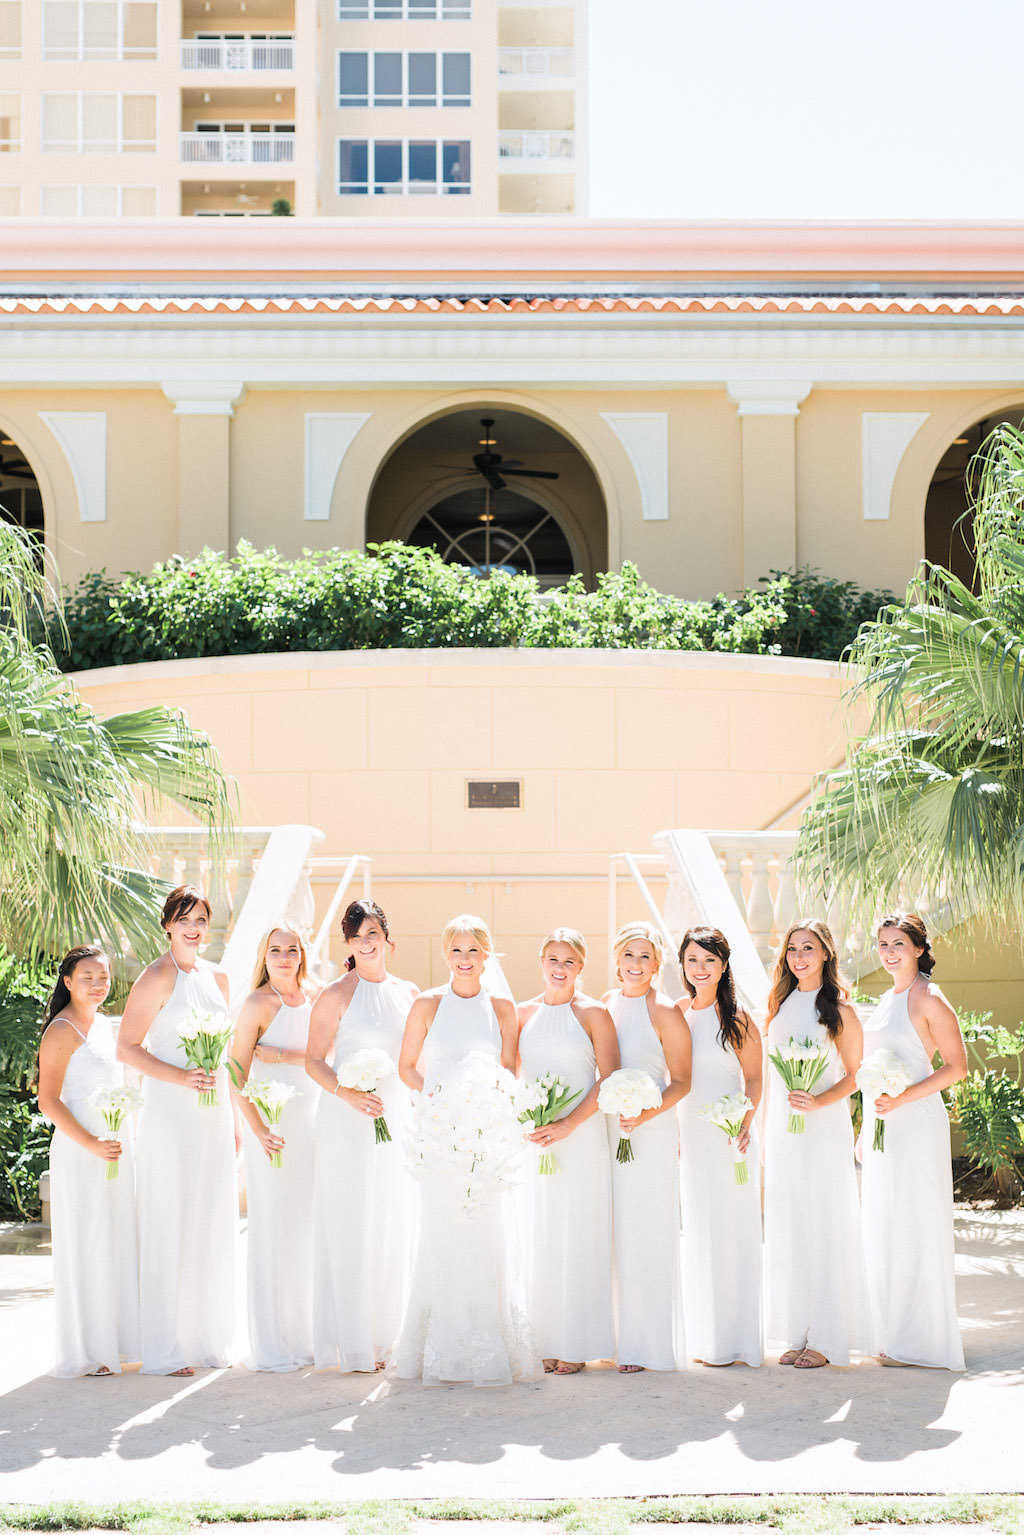 Florida Bride and Bridesmaids in Matching Classic, White, Bateau Neckline, Long Dresses, Carrying Clean, Garden Inspired Wedding Bouquets, The Ritz Carlton Sarasota